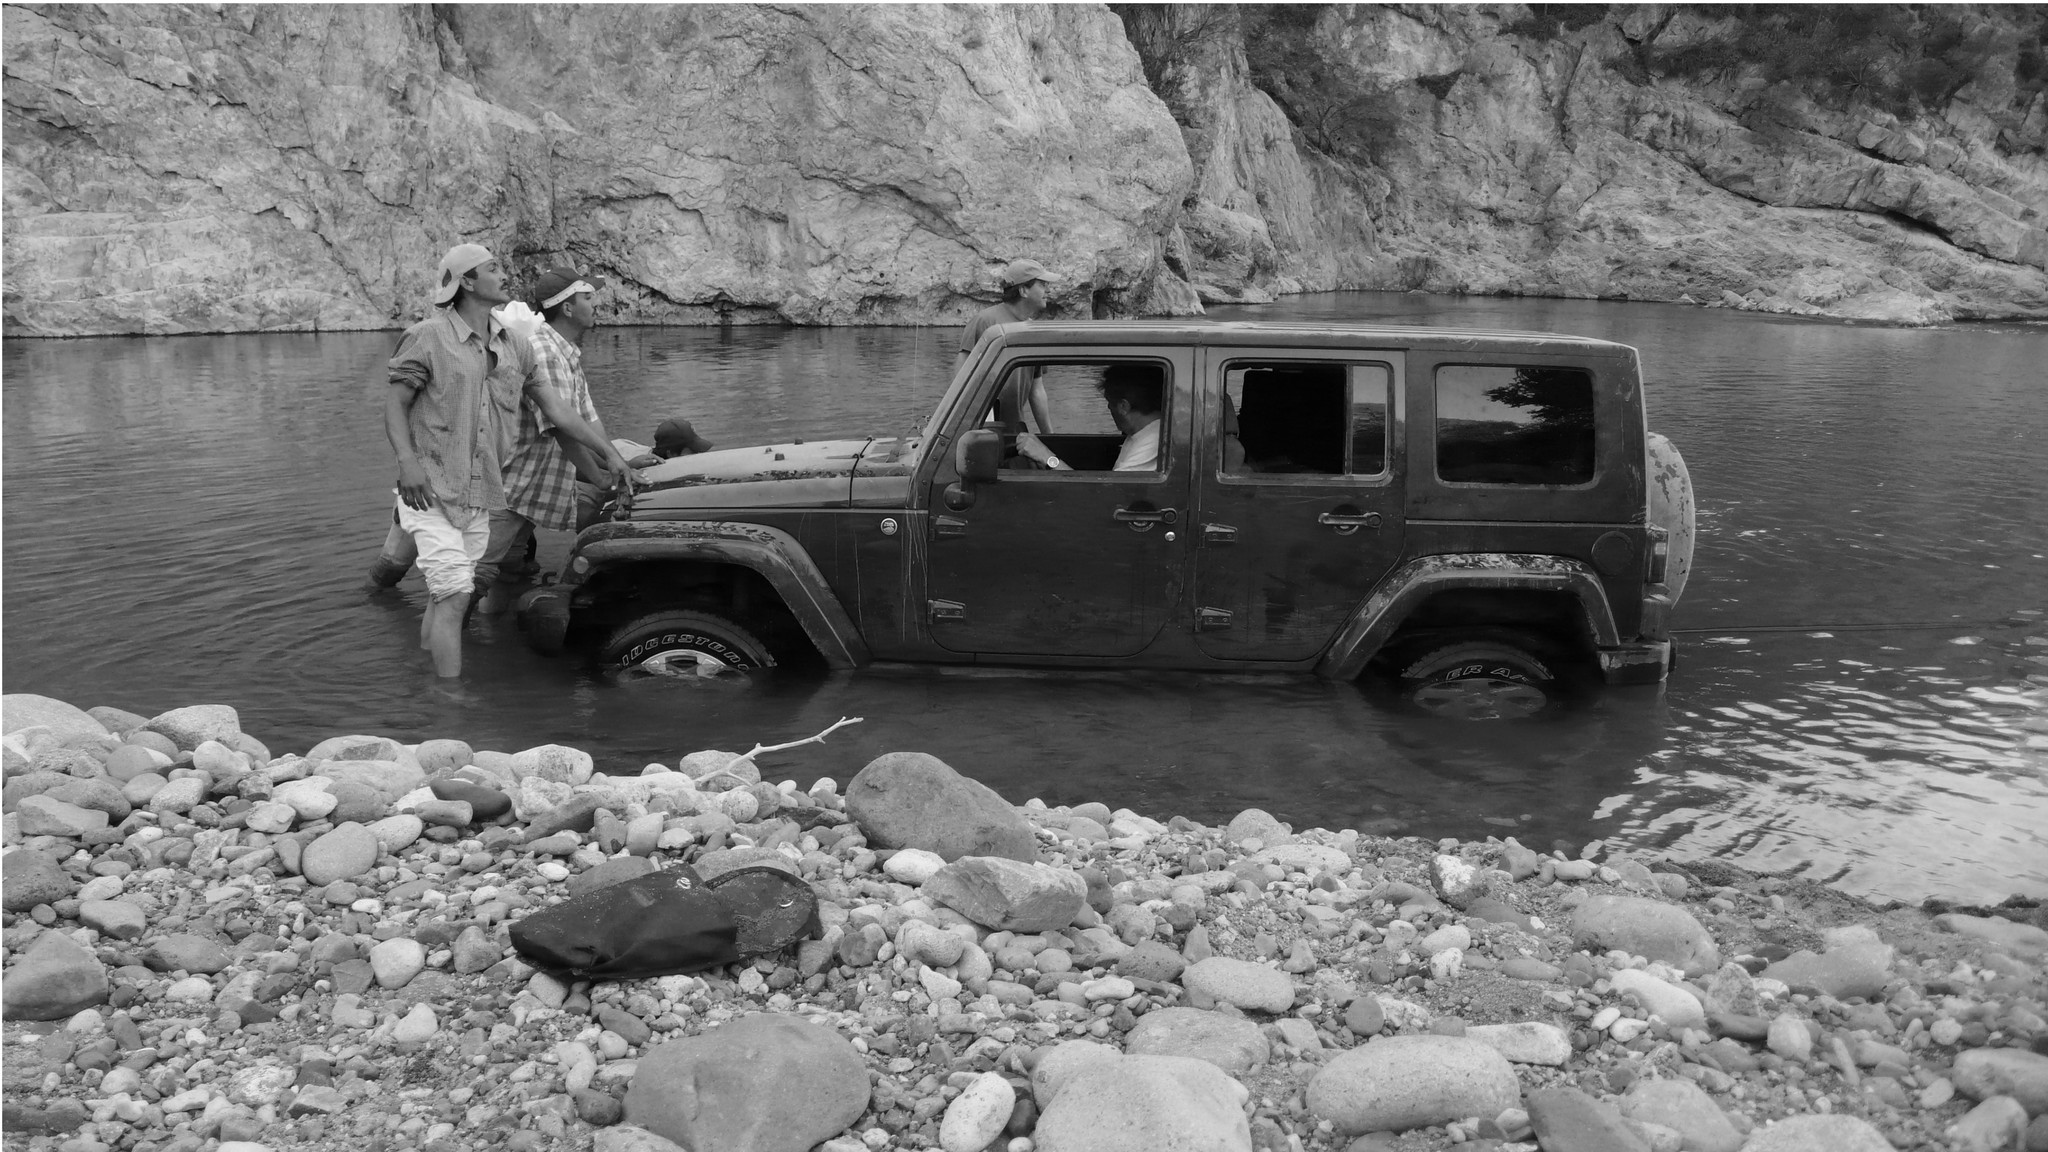 Martin's jeep, stuck in a riverbed.